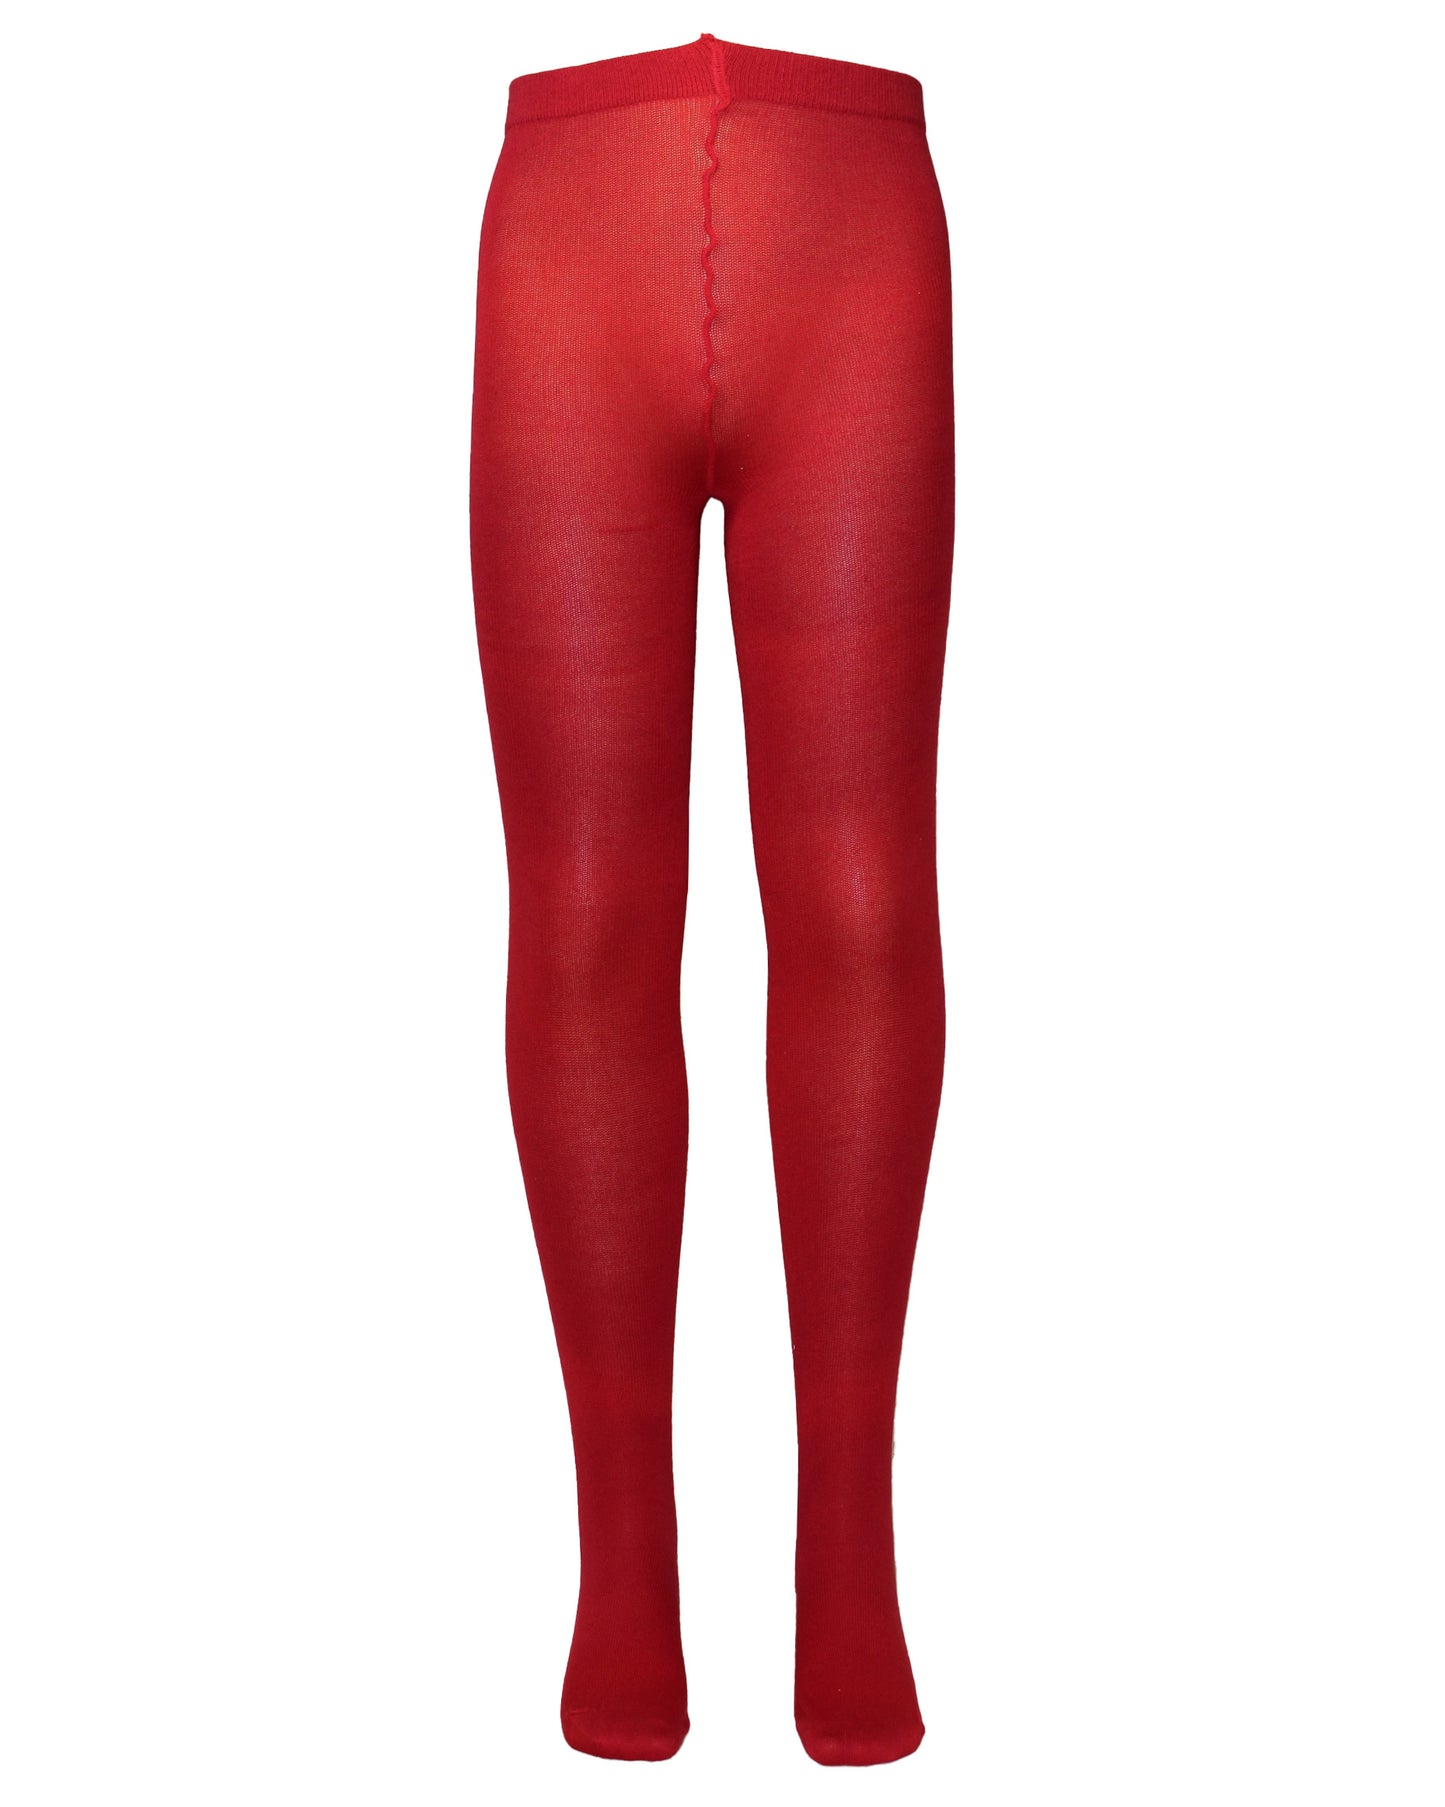 Omsa MiniCotton Collant - Dark red soft cotton mix knitted tights with a deep comfort waistband and flat seamless toe.